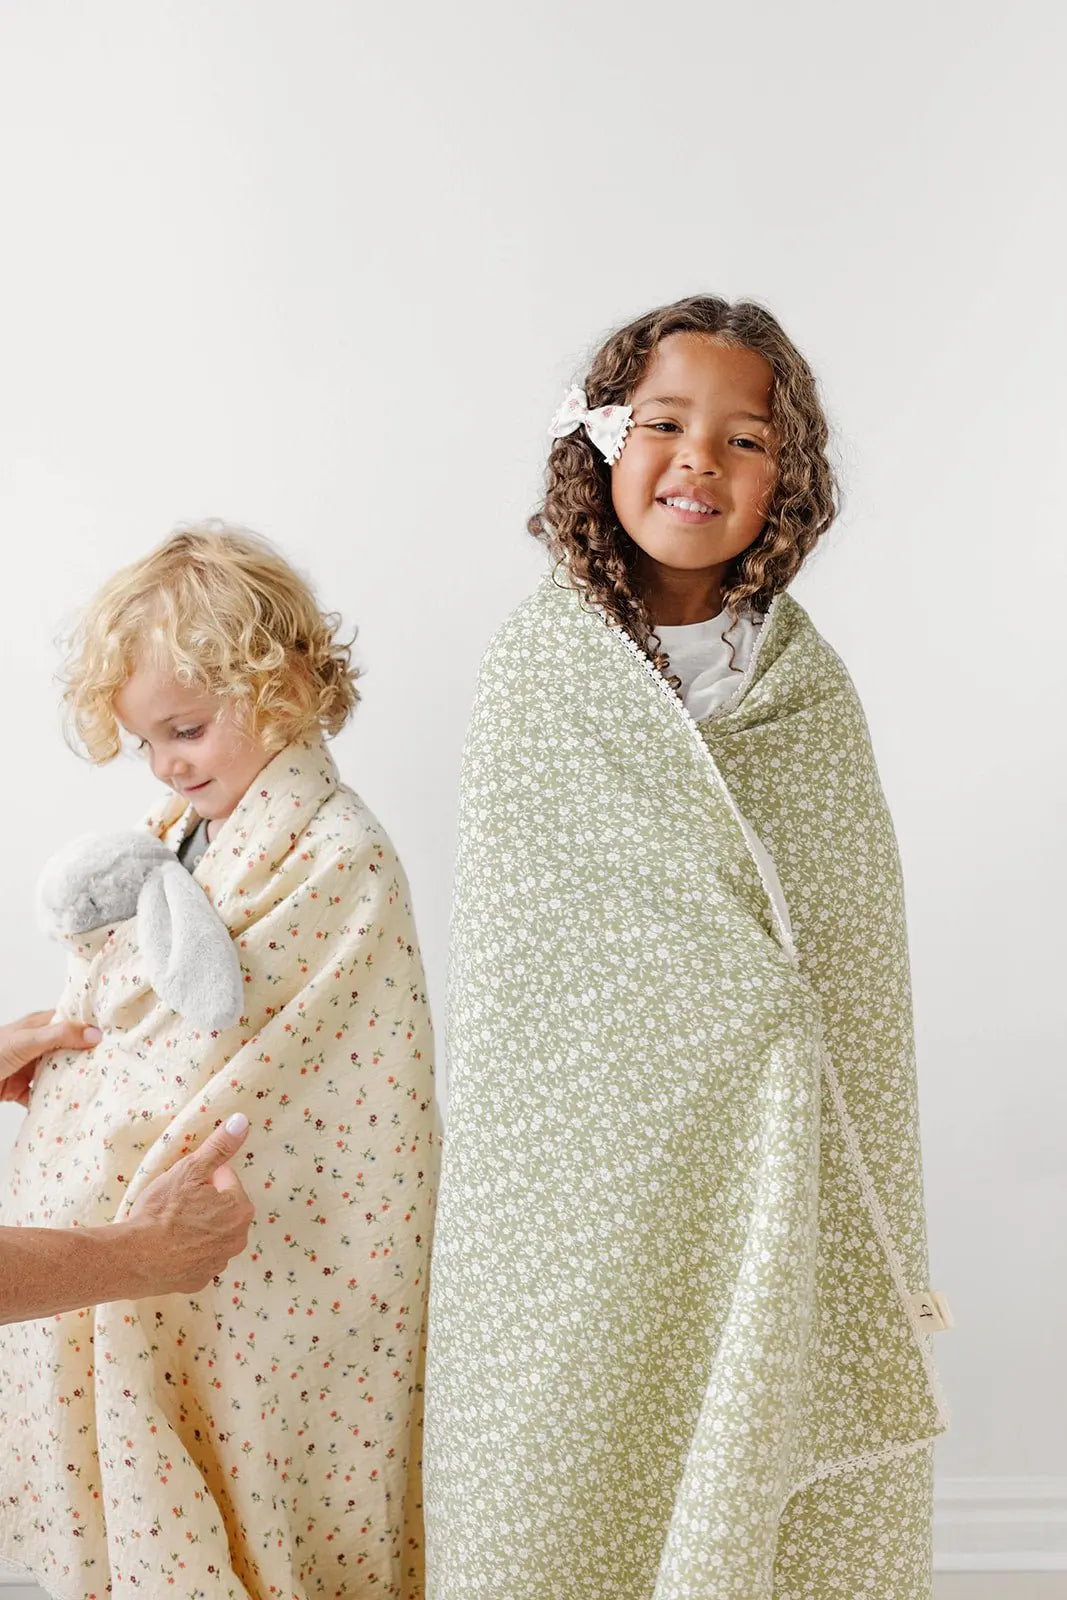 Muslin Blanket- Hearty, Cozy 4-Layered Blanket, Snug and Weighted Feel, Baby Blanket  Bloomere   